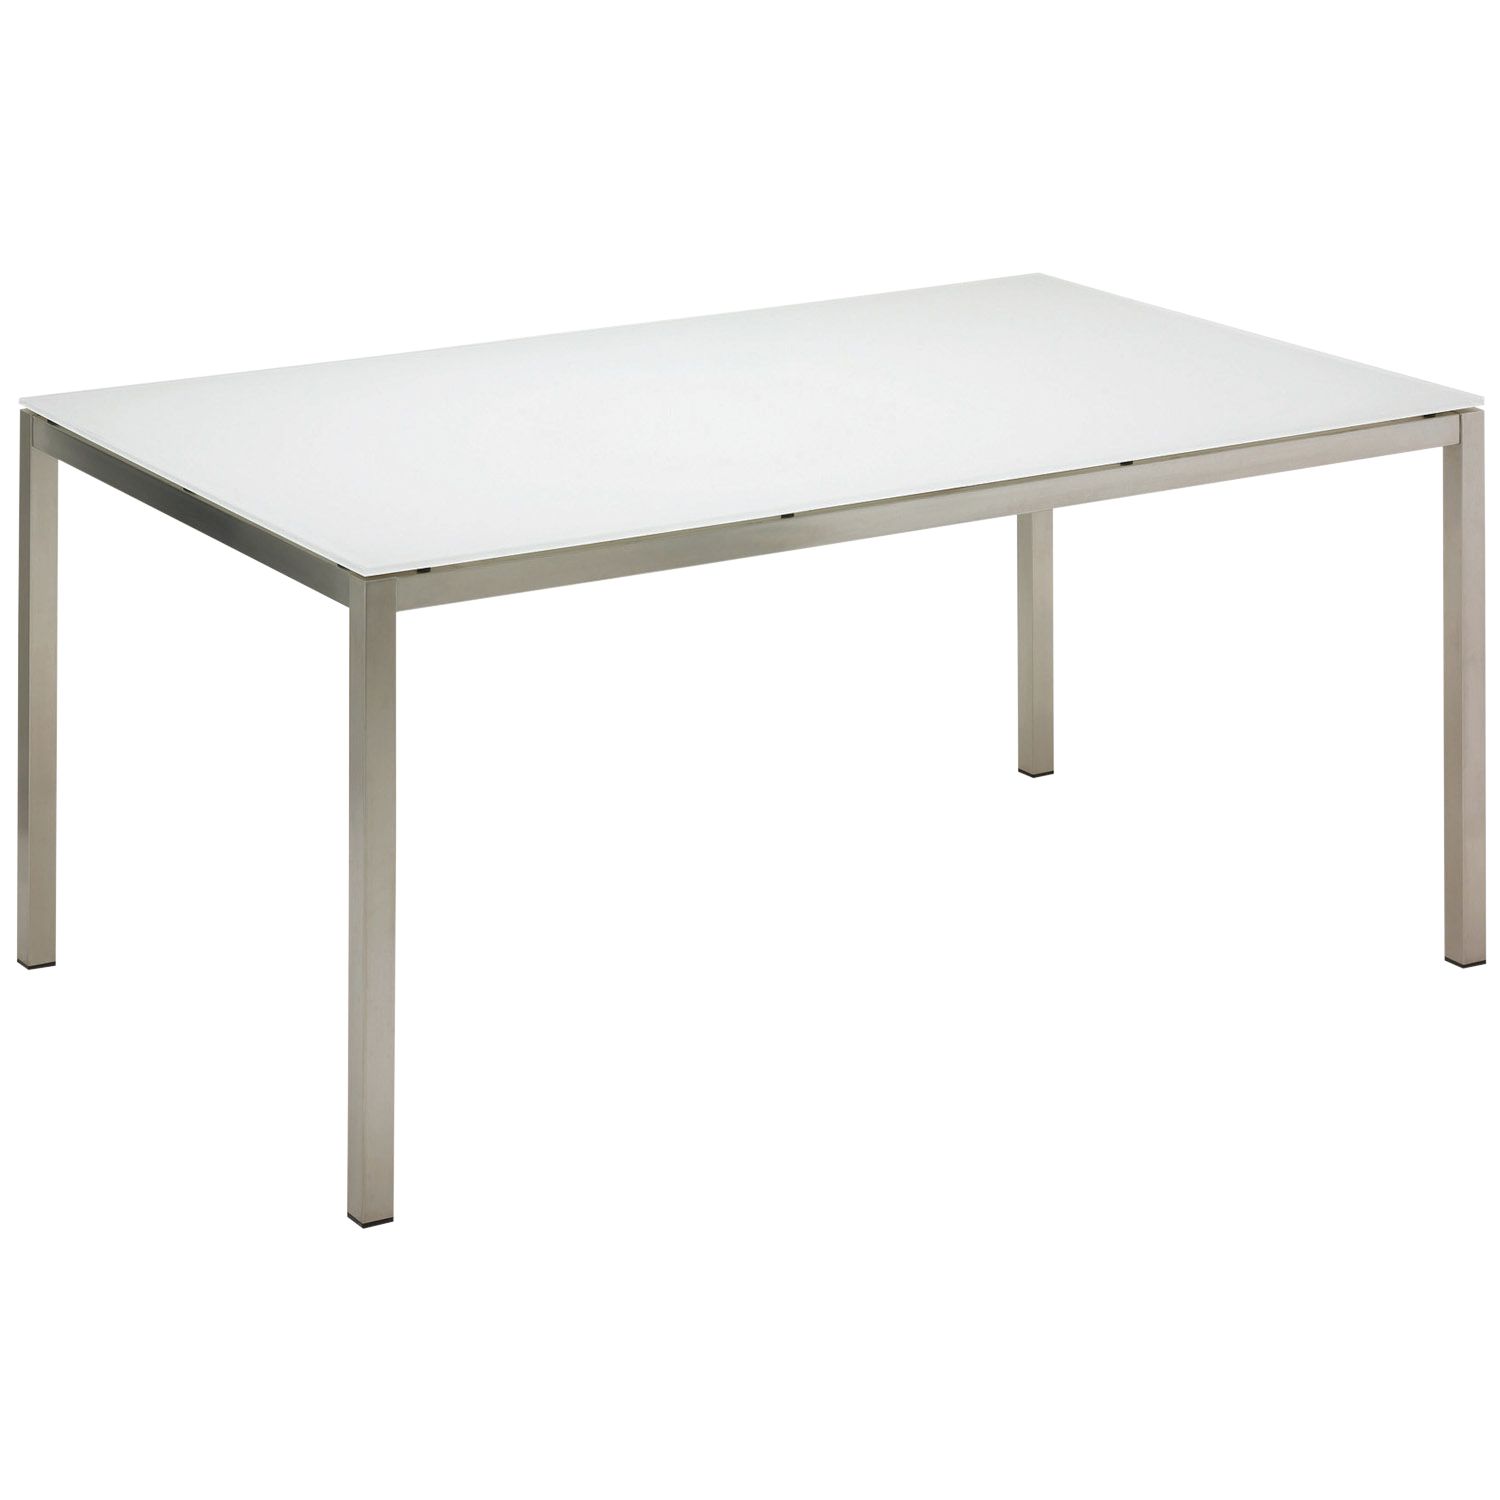 Gloster Kore Rectangular 6 Seater Dining Table, White Glass, width 162cm